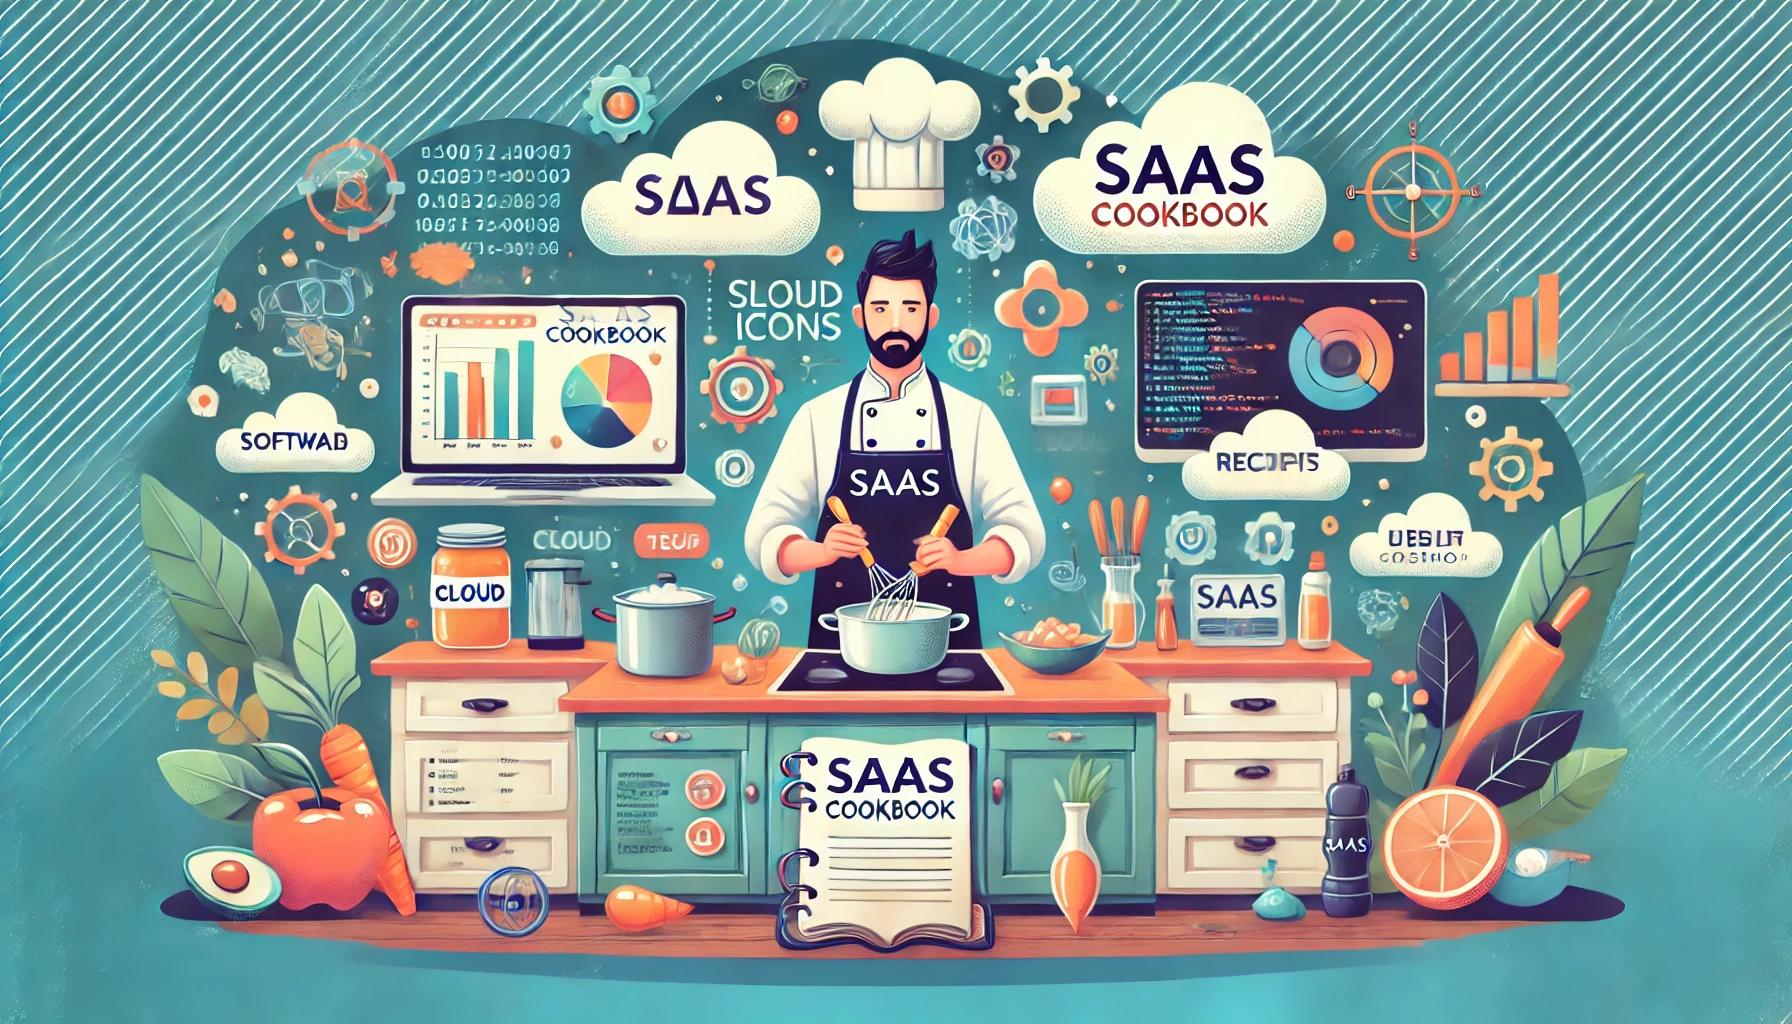 Cover Image for Saas cookbook